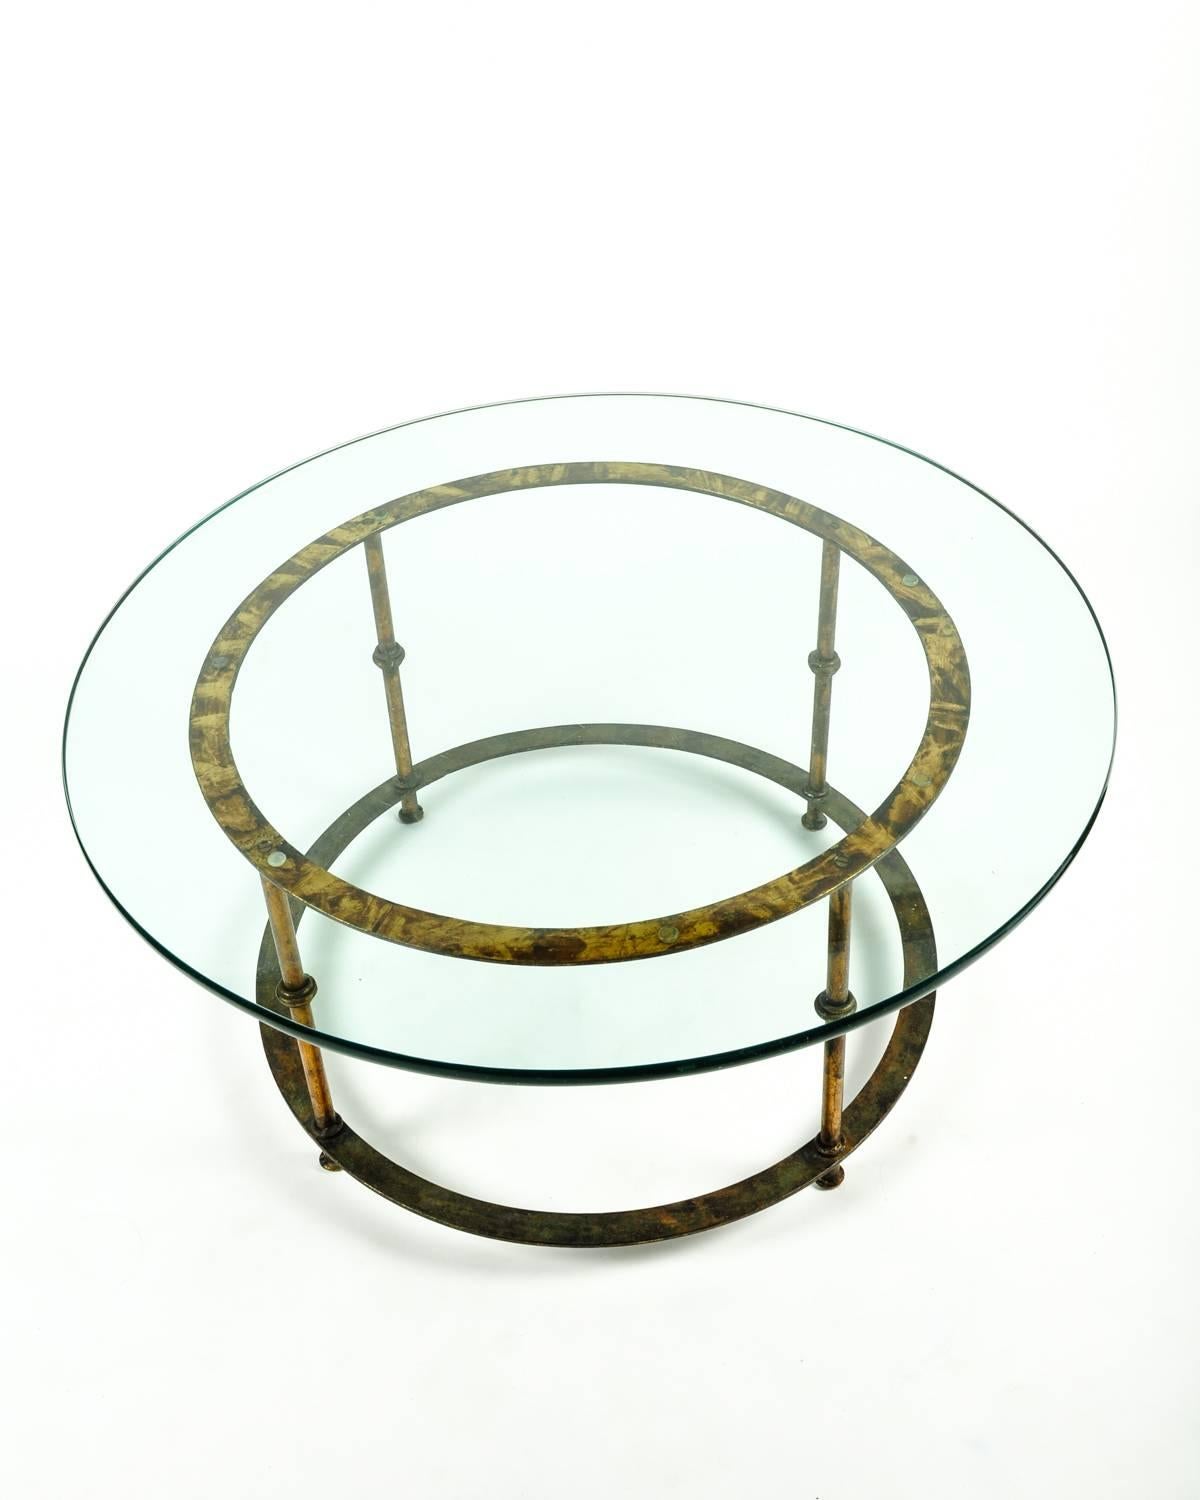 Italian Mid-Century Round Brass Table with Glass Top